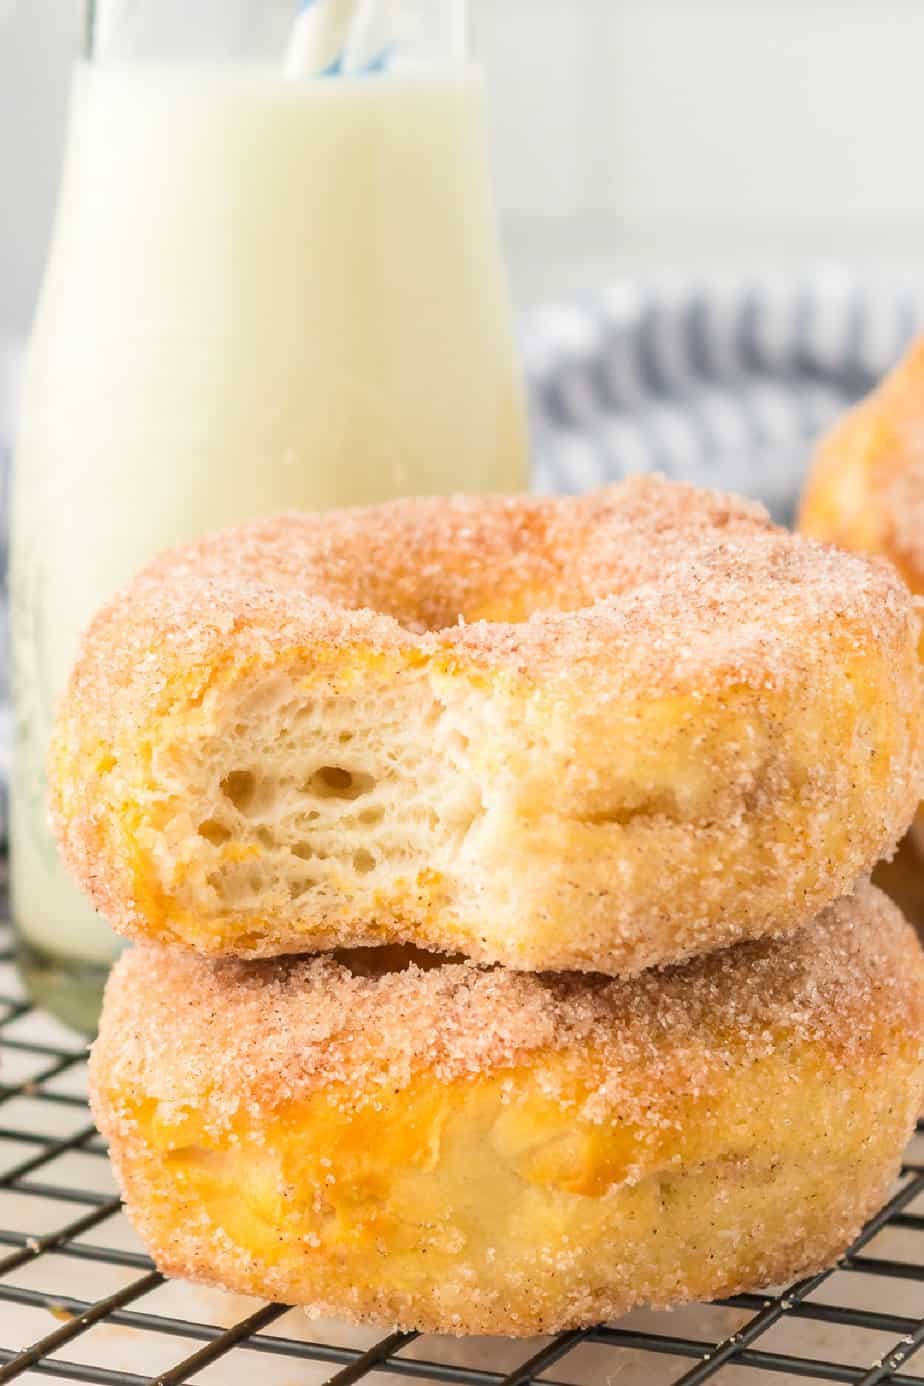 Two stacked donuts on a wire cooling rack on a counter from the side with the top donut missing a bite and a glass of milk behind.